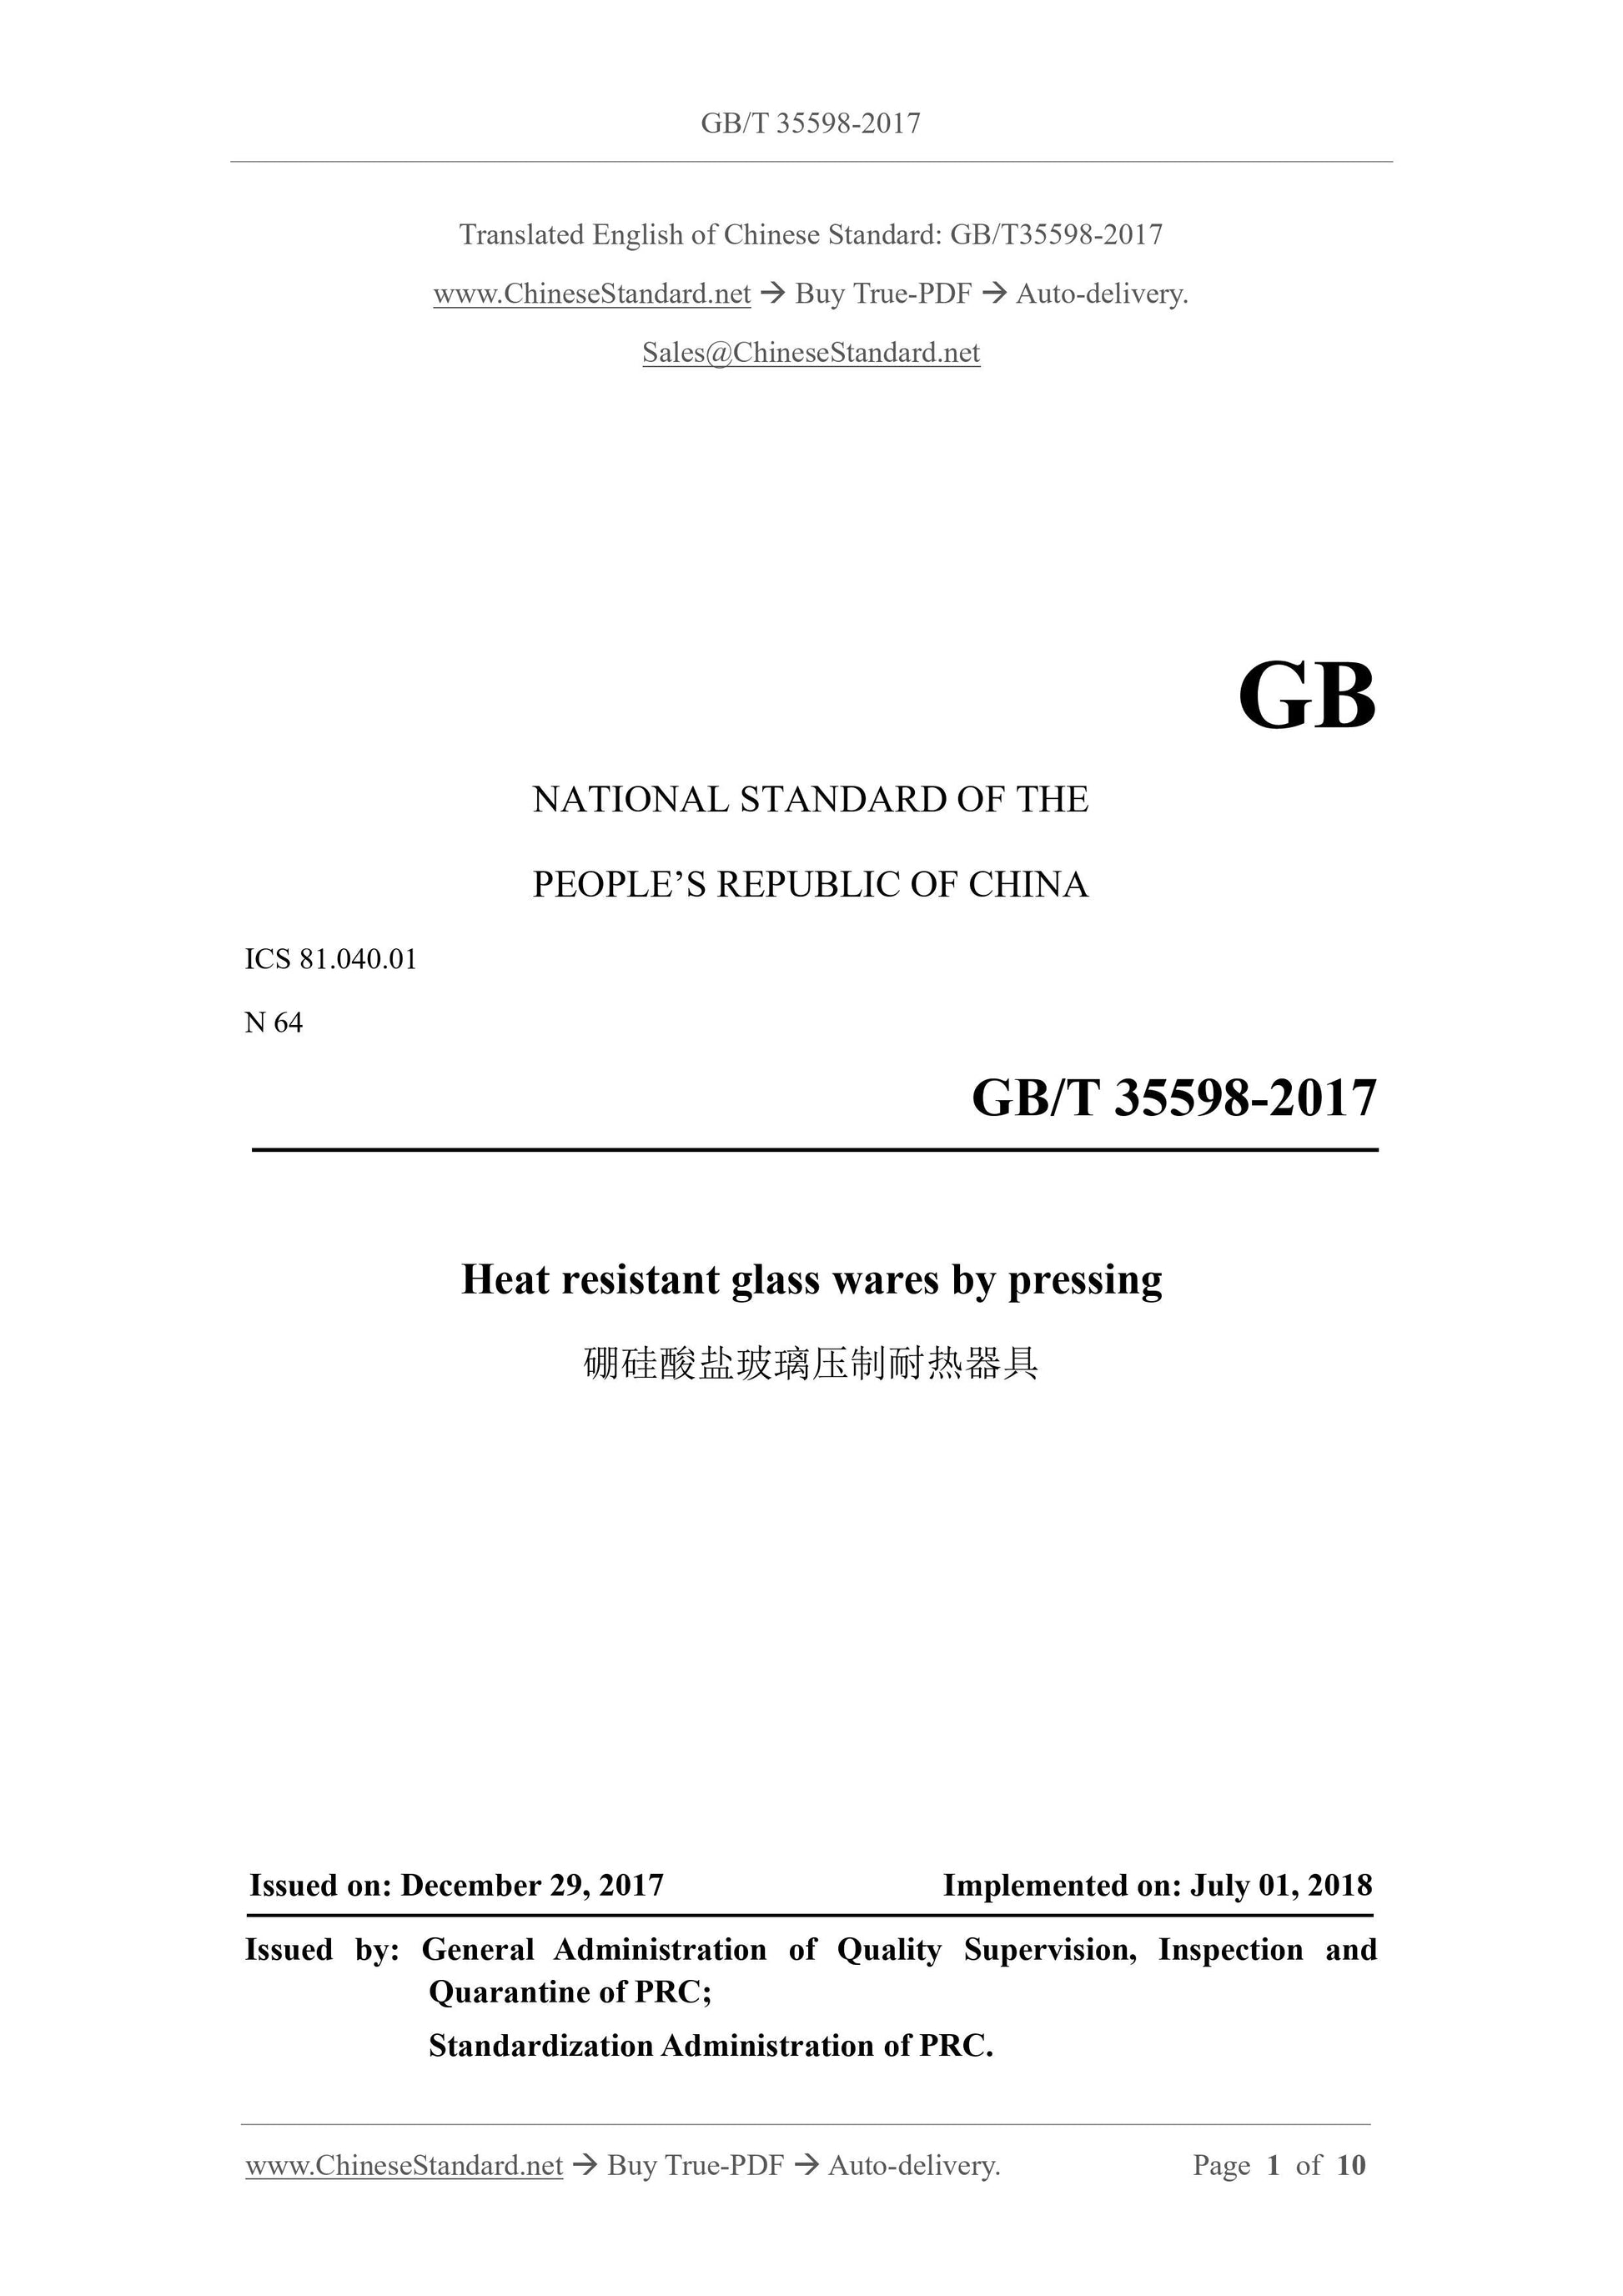 GB/T 35598-2017 Page 1